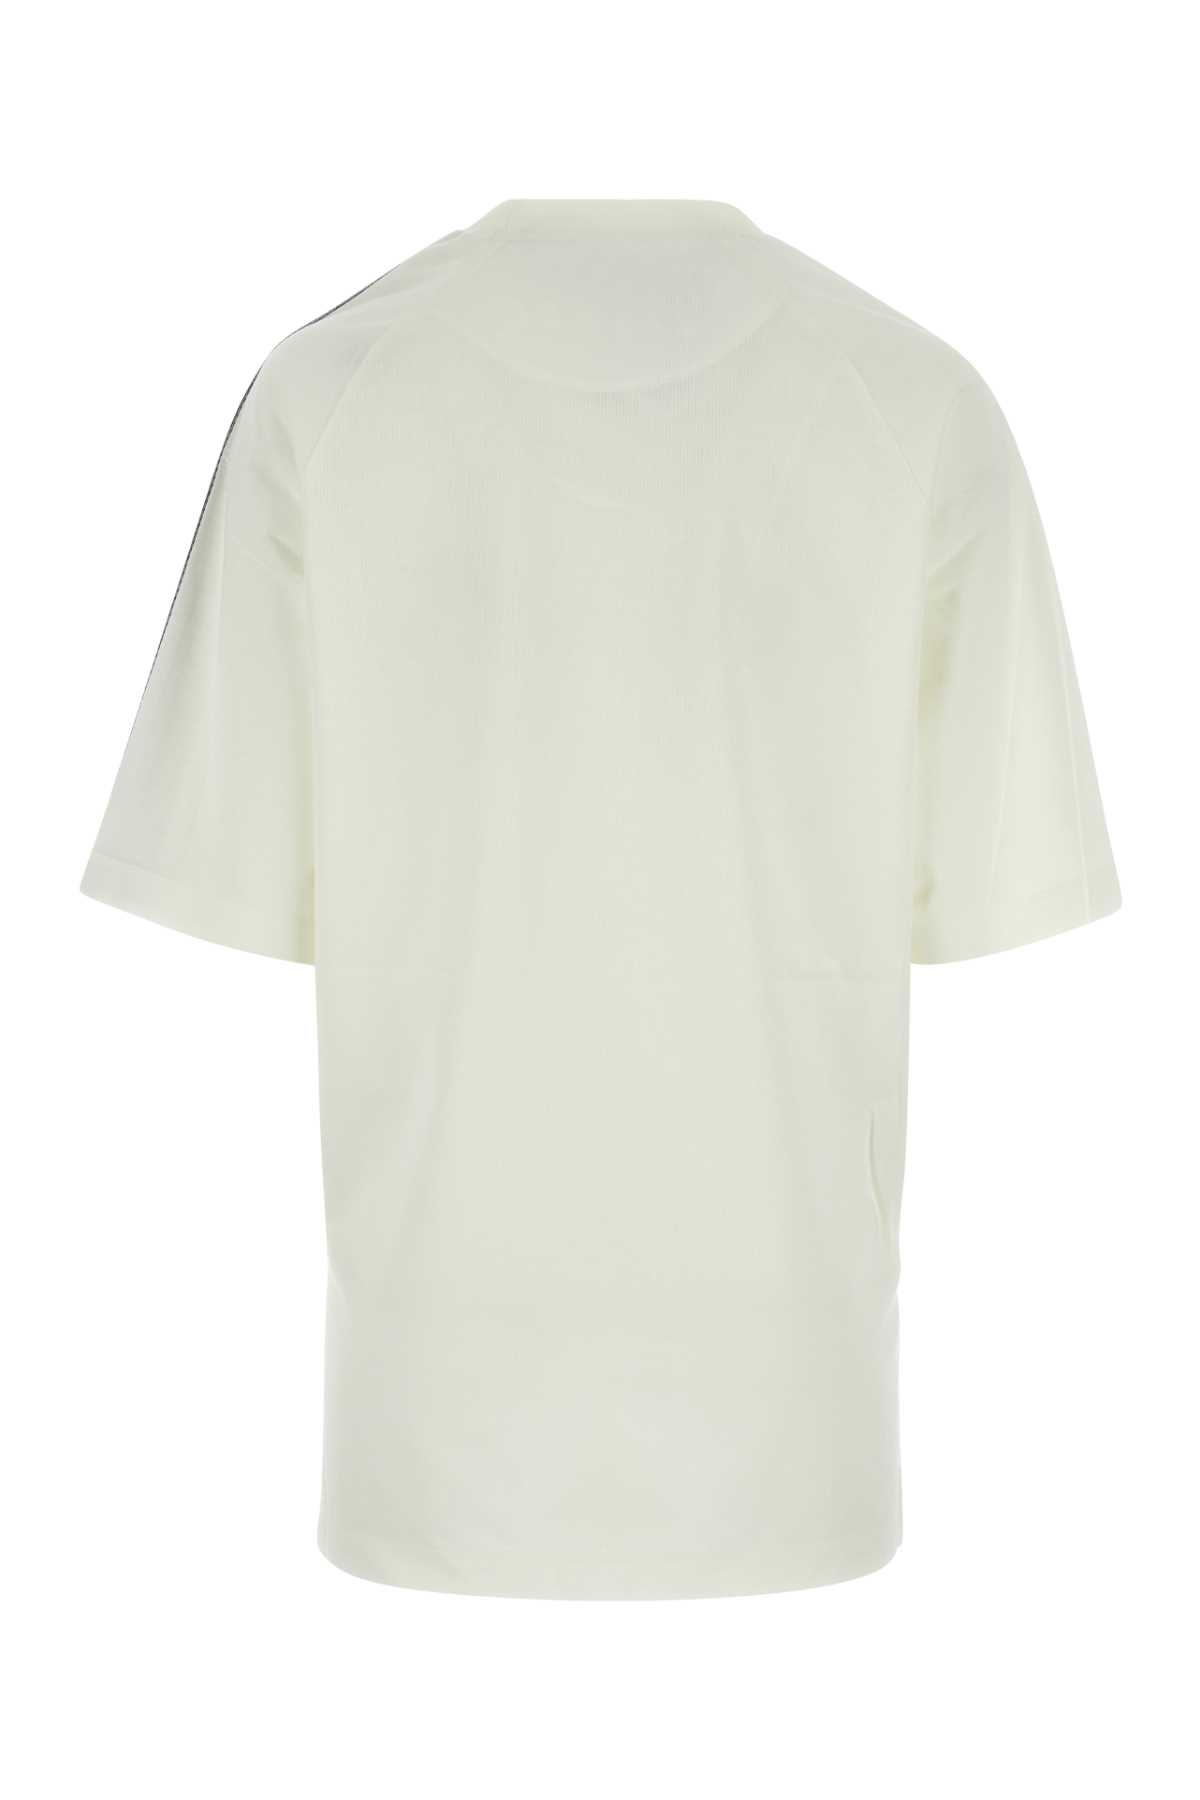 Y-3 White Cotton Blend Oversize T-shirt In Owhite